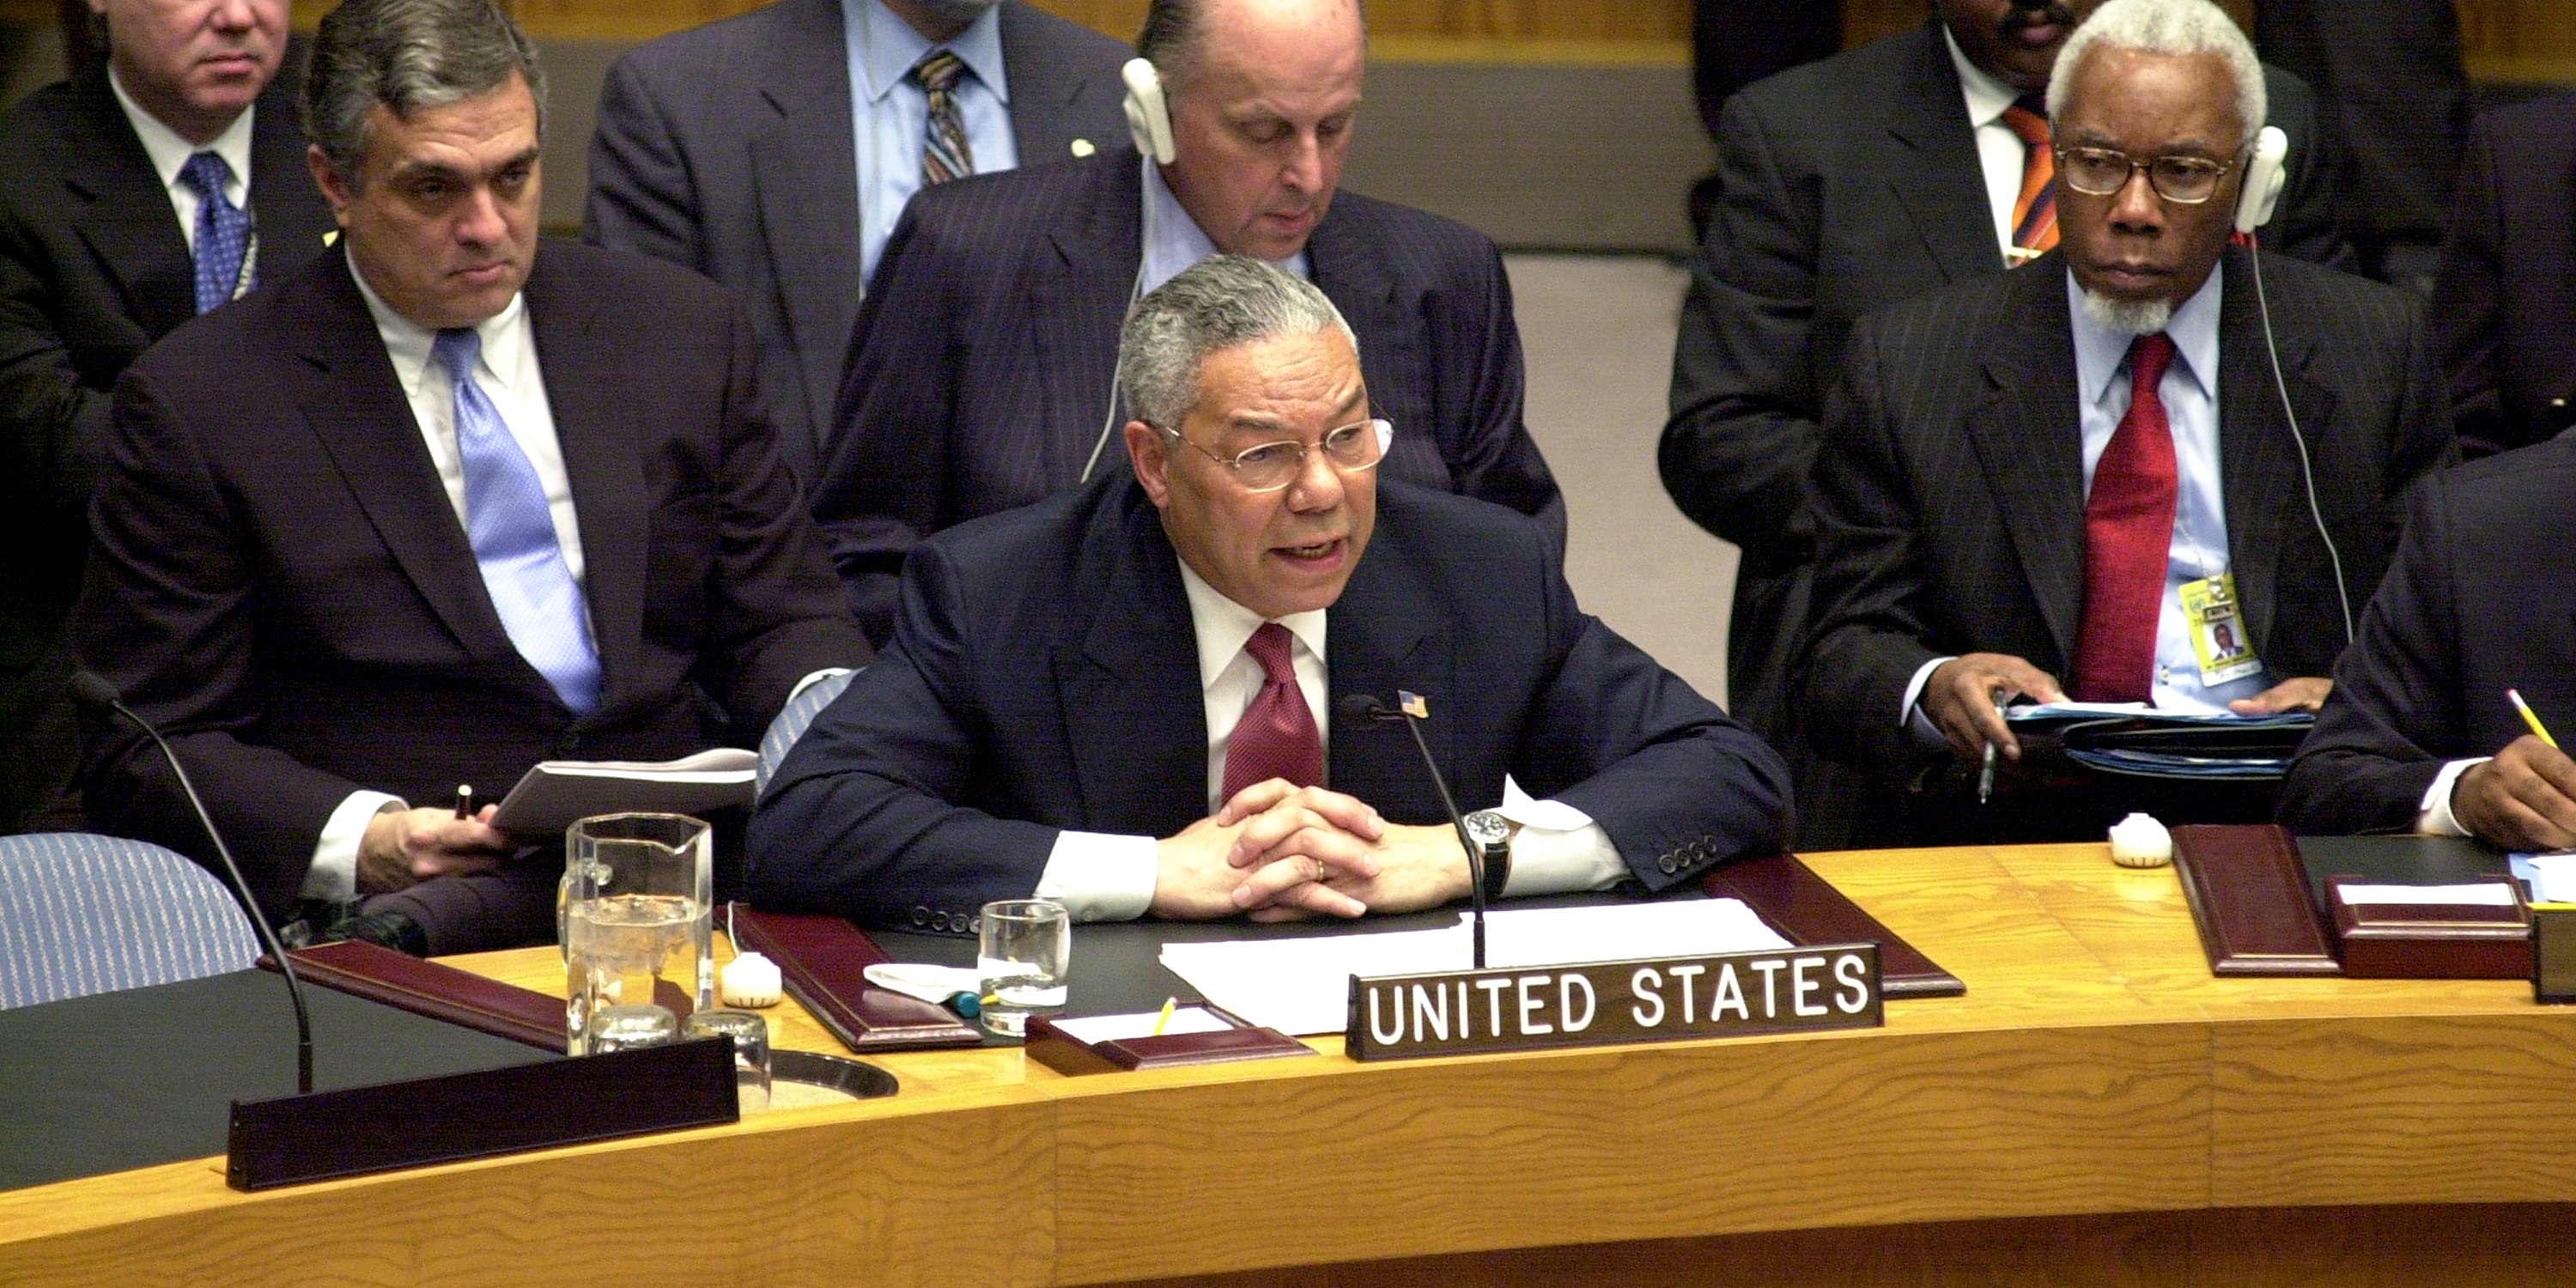 UNITED STATES - FEBRUARY 05:  Secretary of State Colin Powell addresses the United Nations Security Council. Wielding dramatic satellite photos and intelligence intercepts, he cited "irrefutable and undeniable" evidence that Iraq still conceals massive quantities of terror weapons. Seated in the row behind Powell, is CIA Director George Tenet (left).  (Photo by Thomas Monaster/NY Daily News Archive via Getty Images)